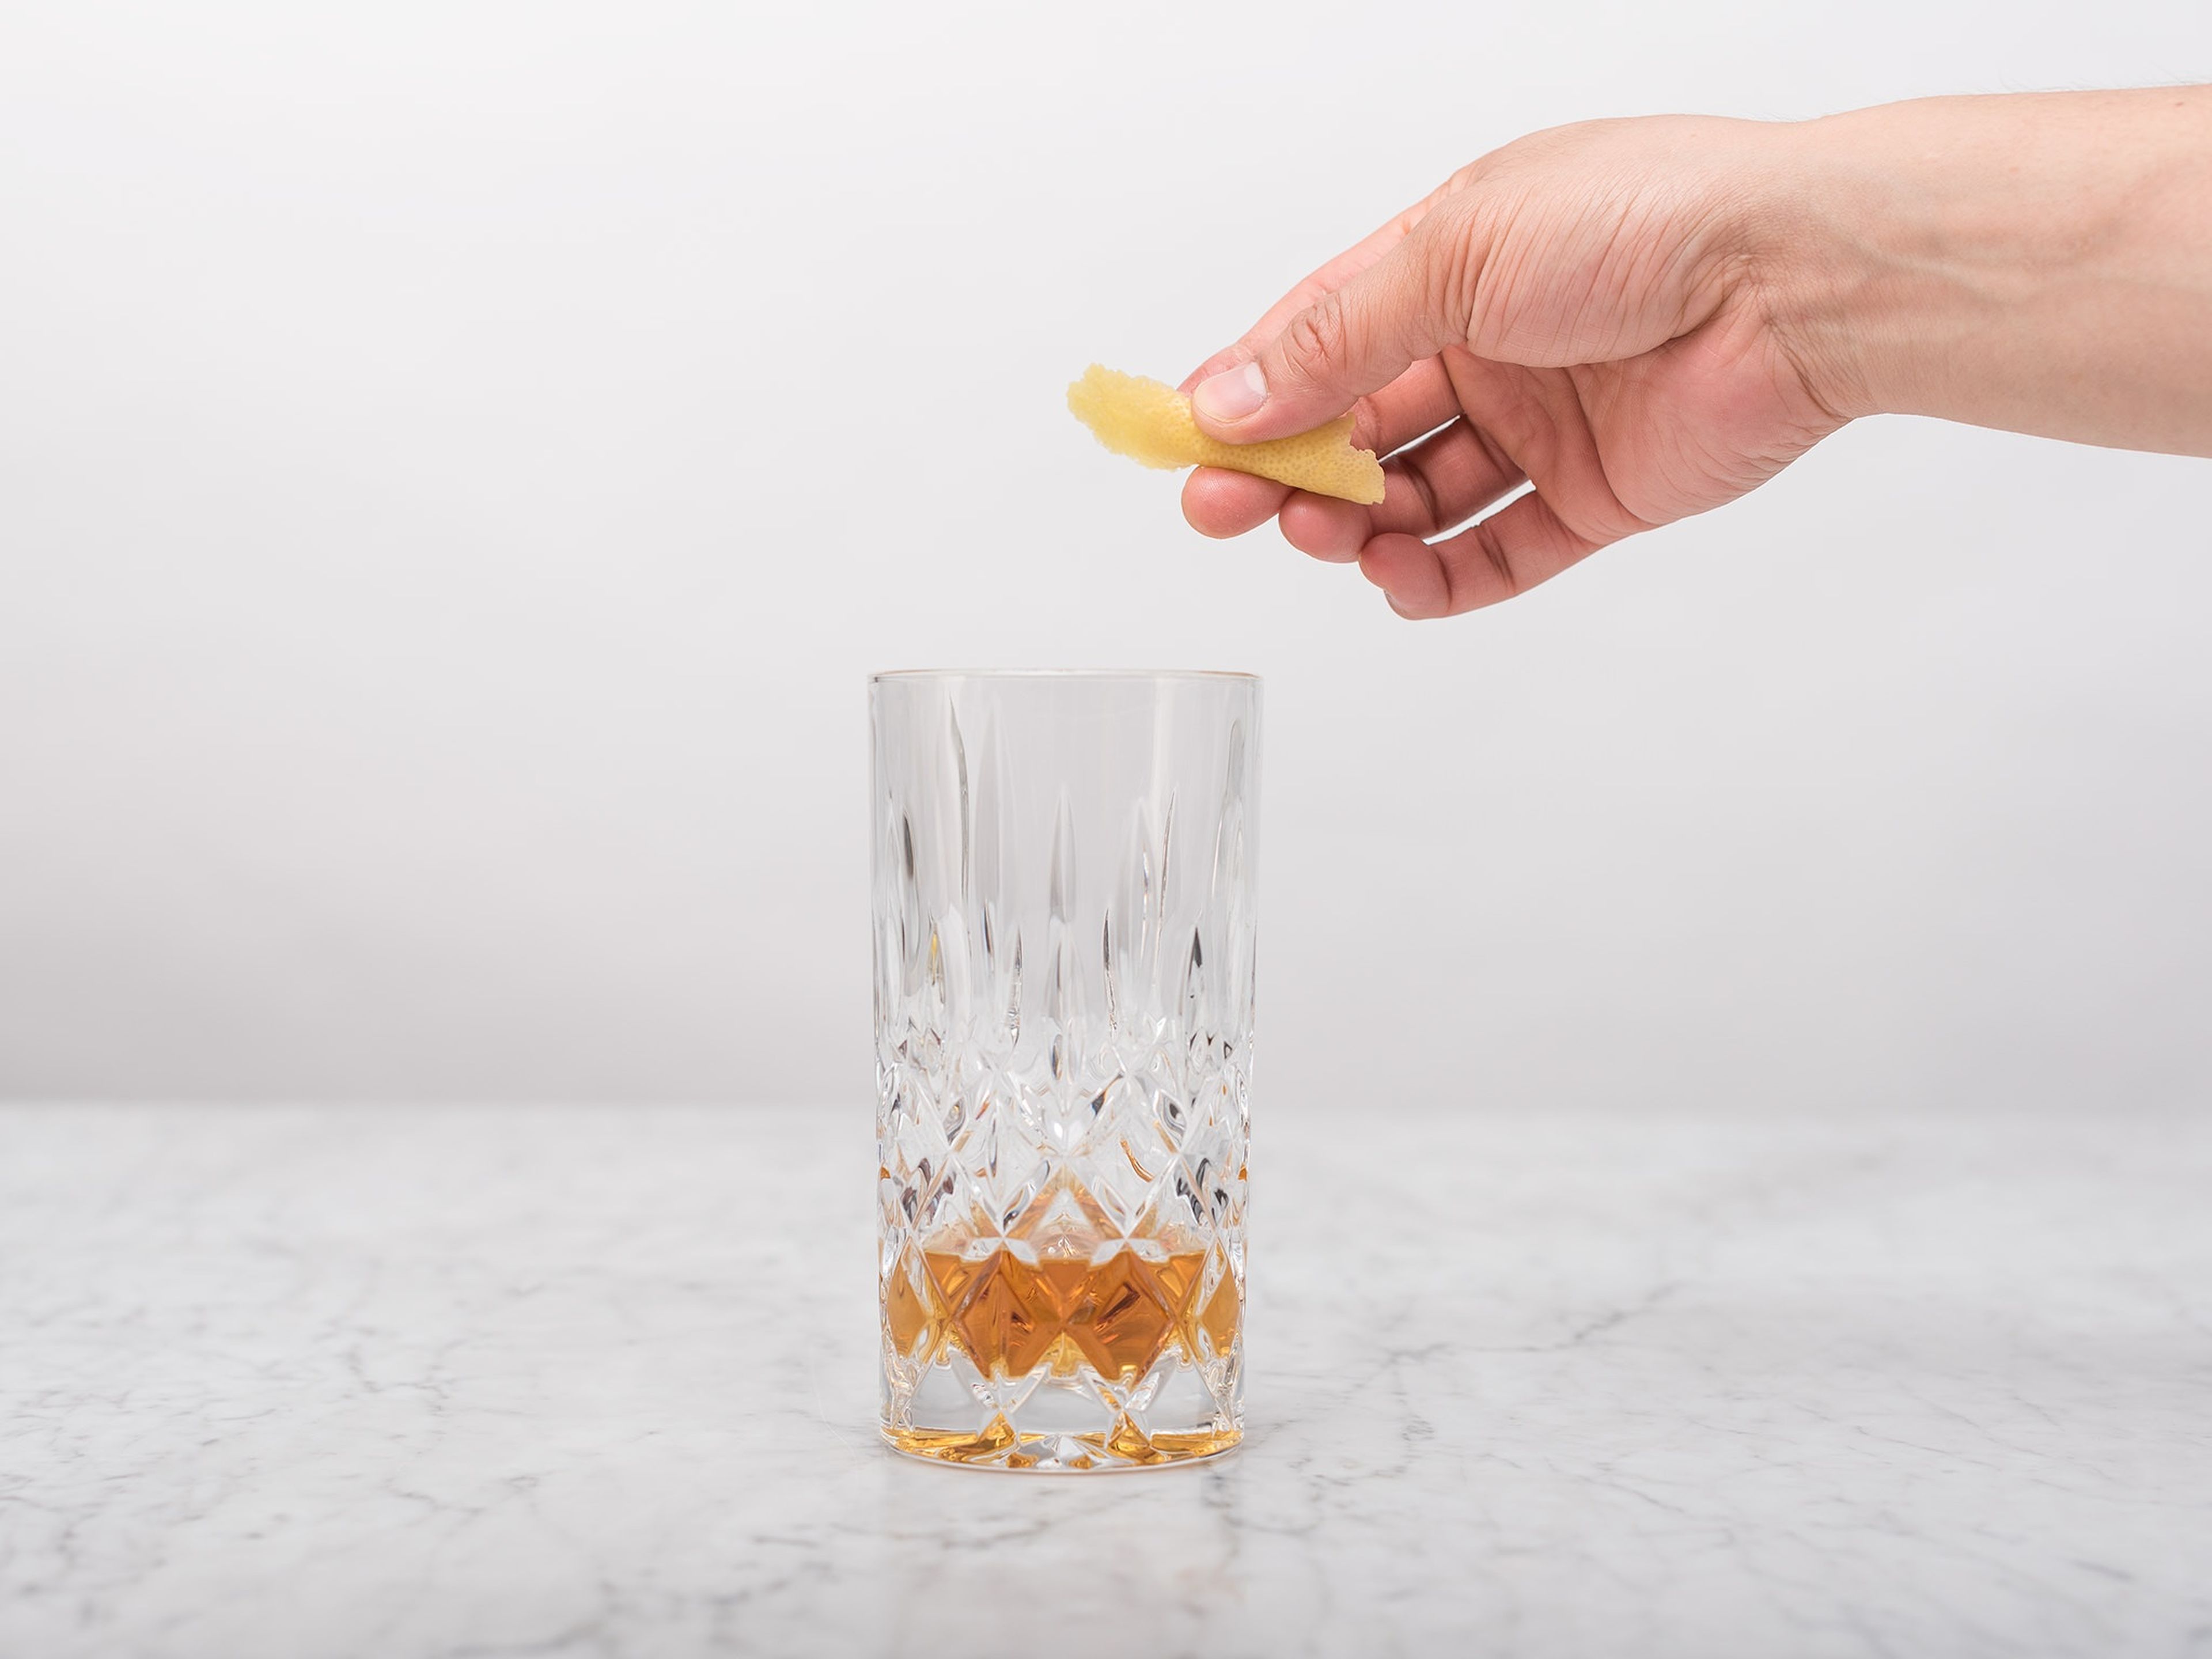 Peel three lemon rinds for each glass, spritz on the rim of the glass, then place peels in glass.